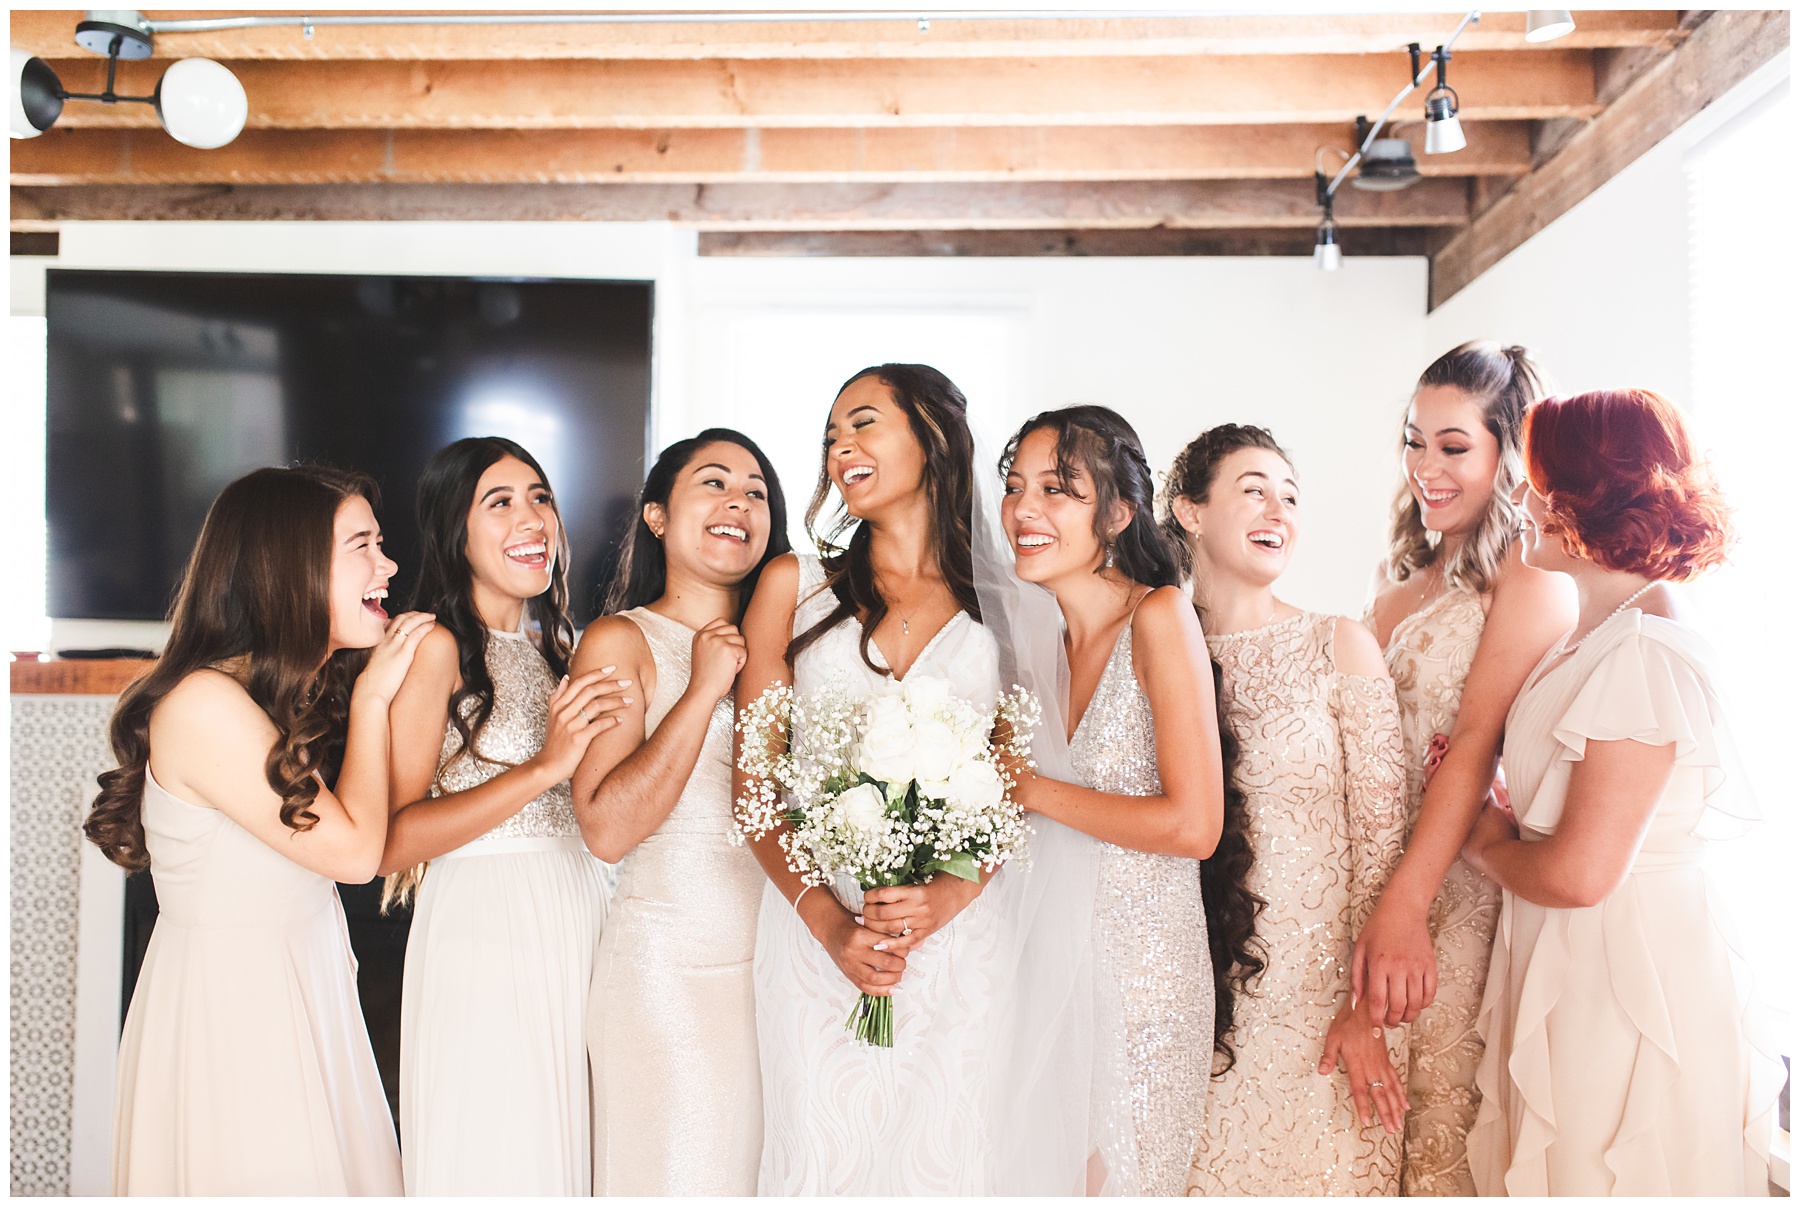 Smiling and laughing bride and bridesmaids inspiration for your wedding